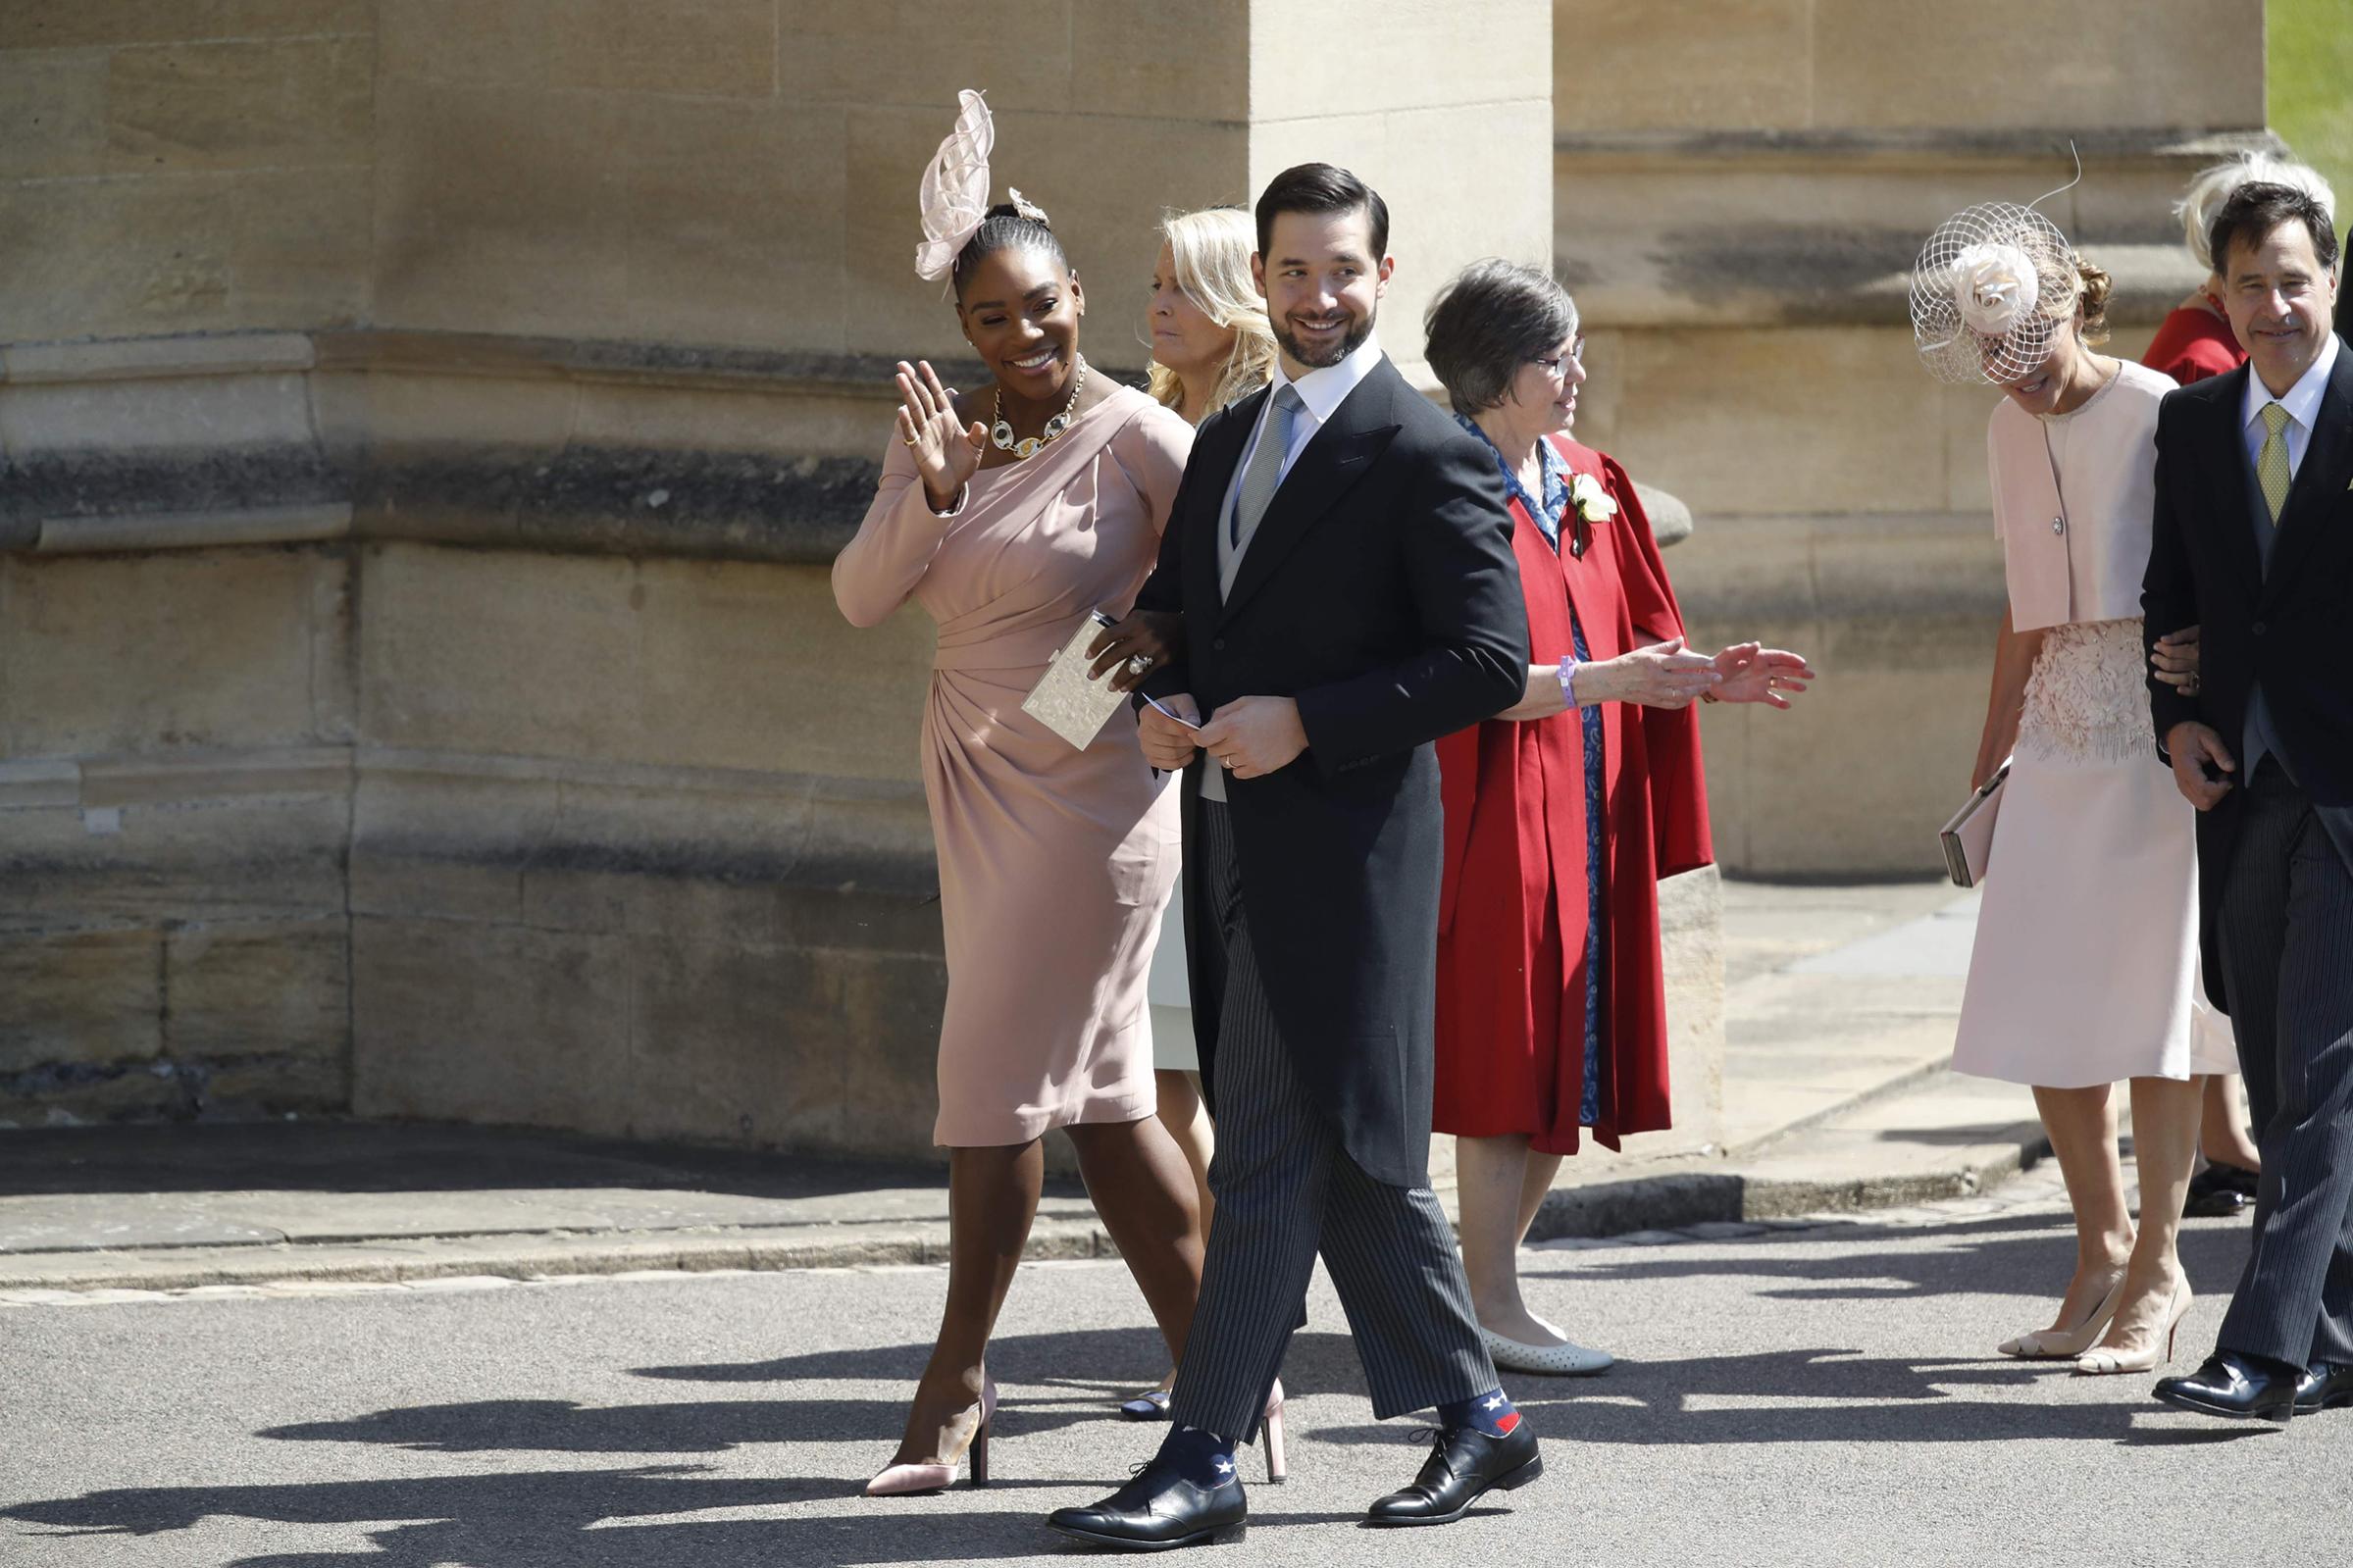 Serena Williams and her husband Alexis Ohanian arrive for the wedding ceremony of Britain's Prince Harry and Meghan Markle at St George's Chapel, Windsor Castle, in Windsor, on May 19, 2018.